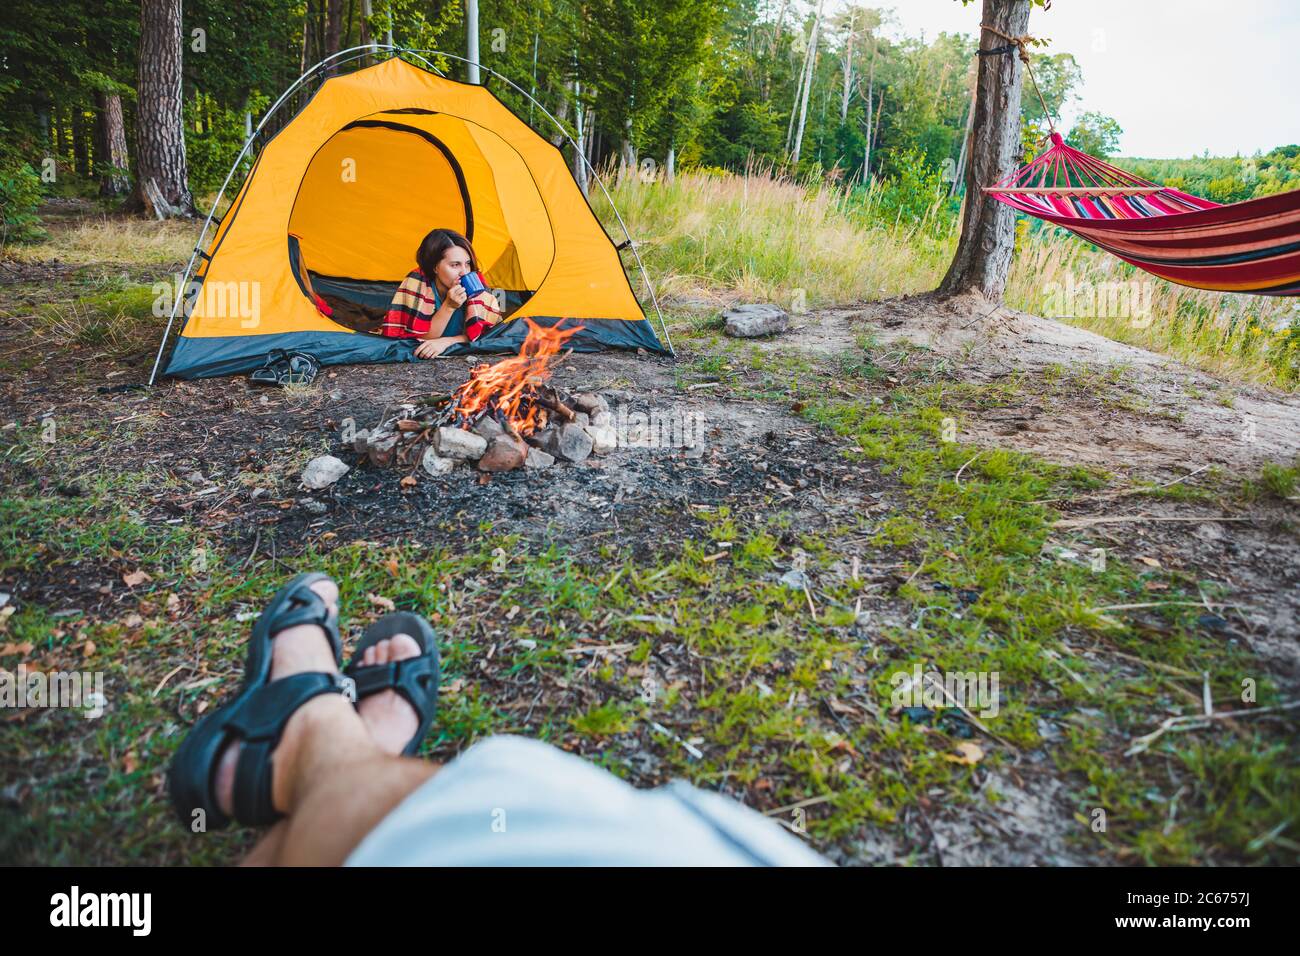 couple resting outdoors near cam fire in yellow tent Stock Photo